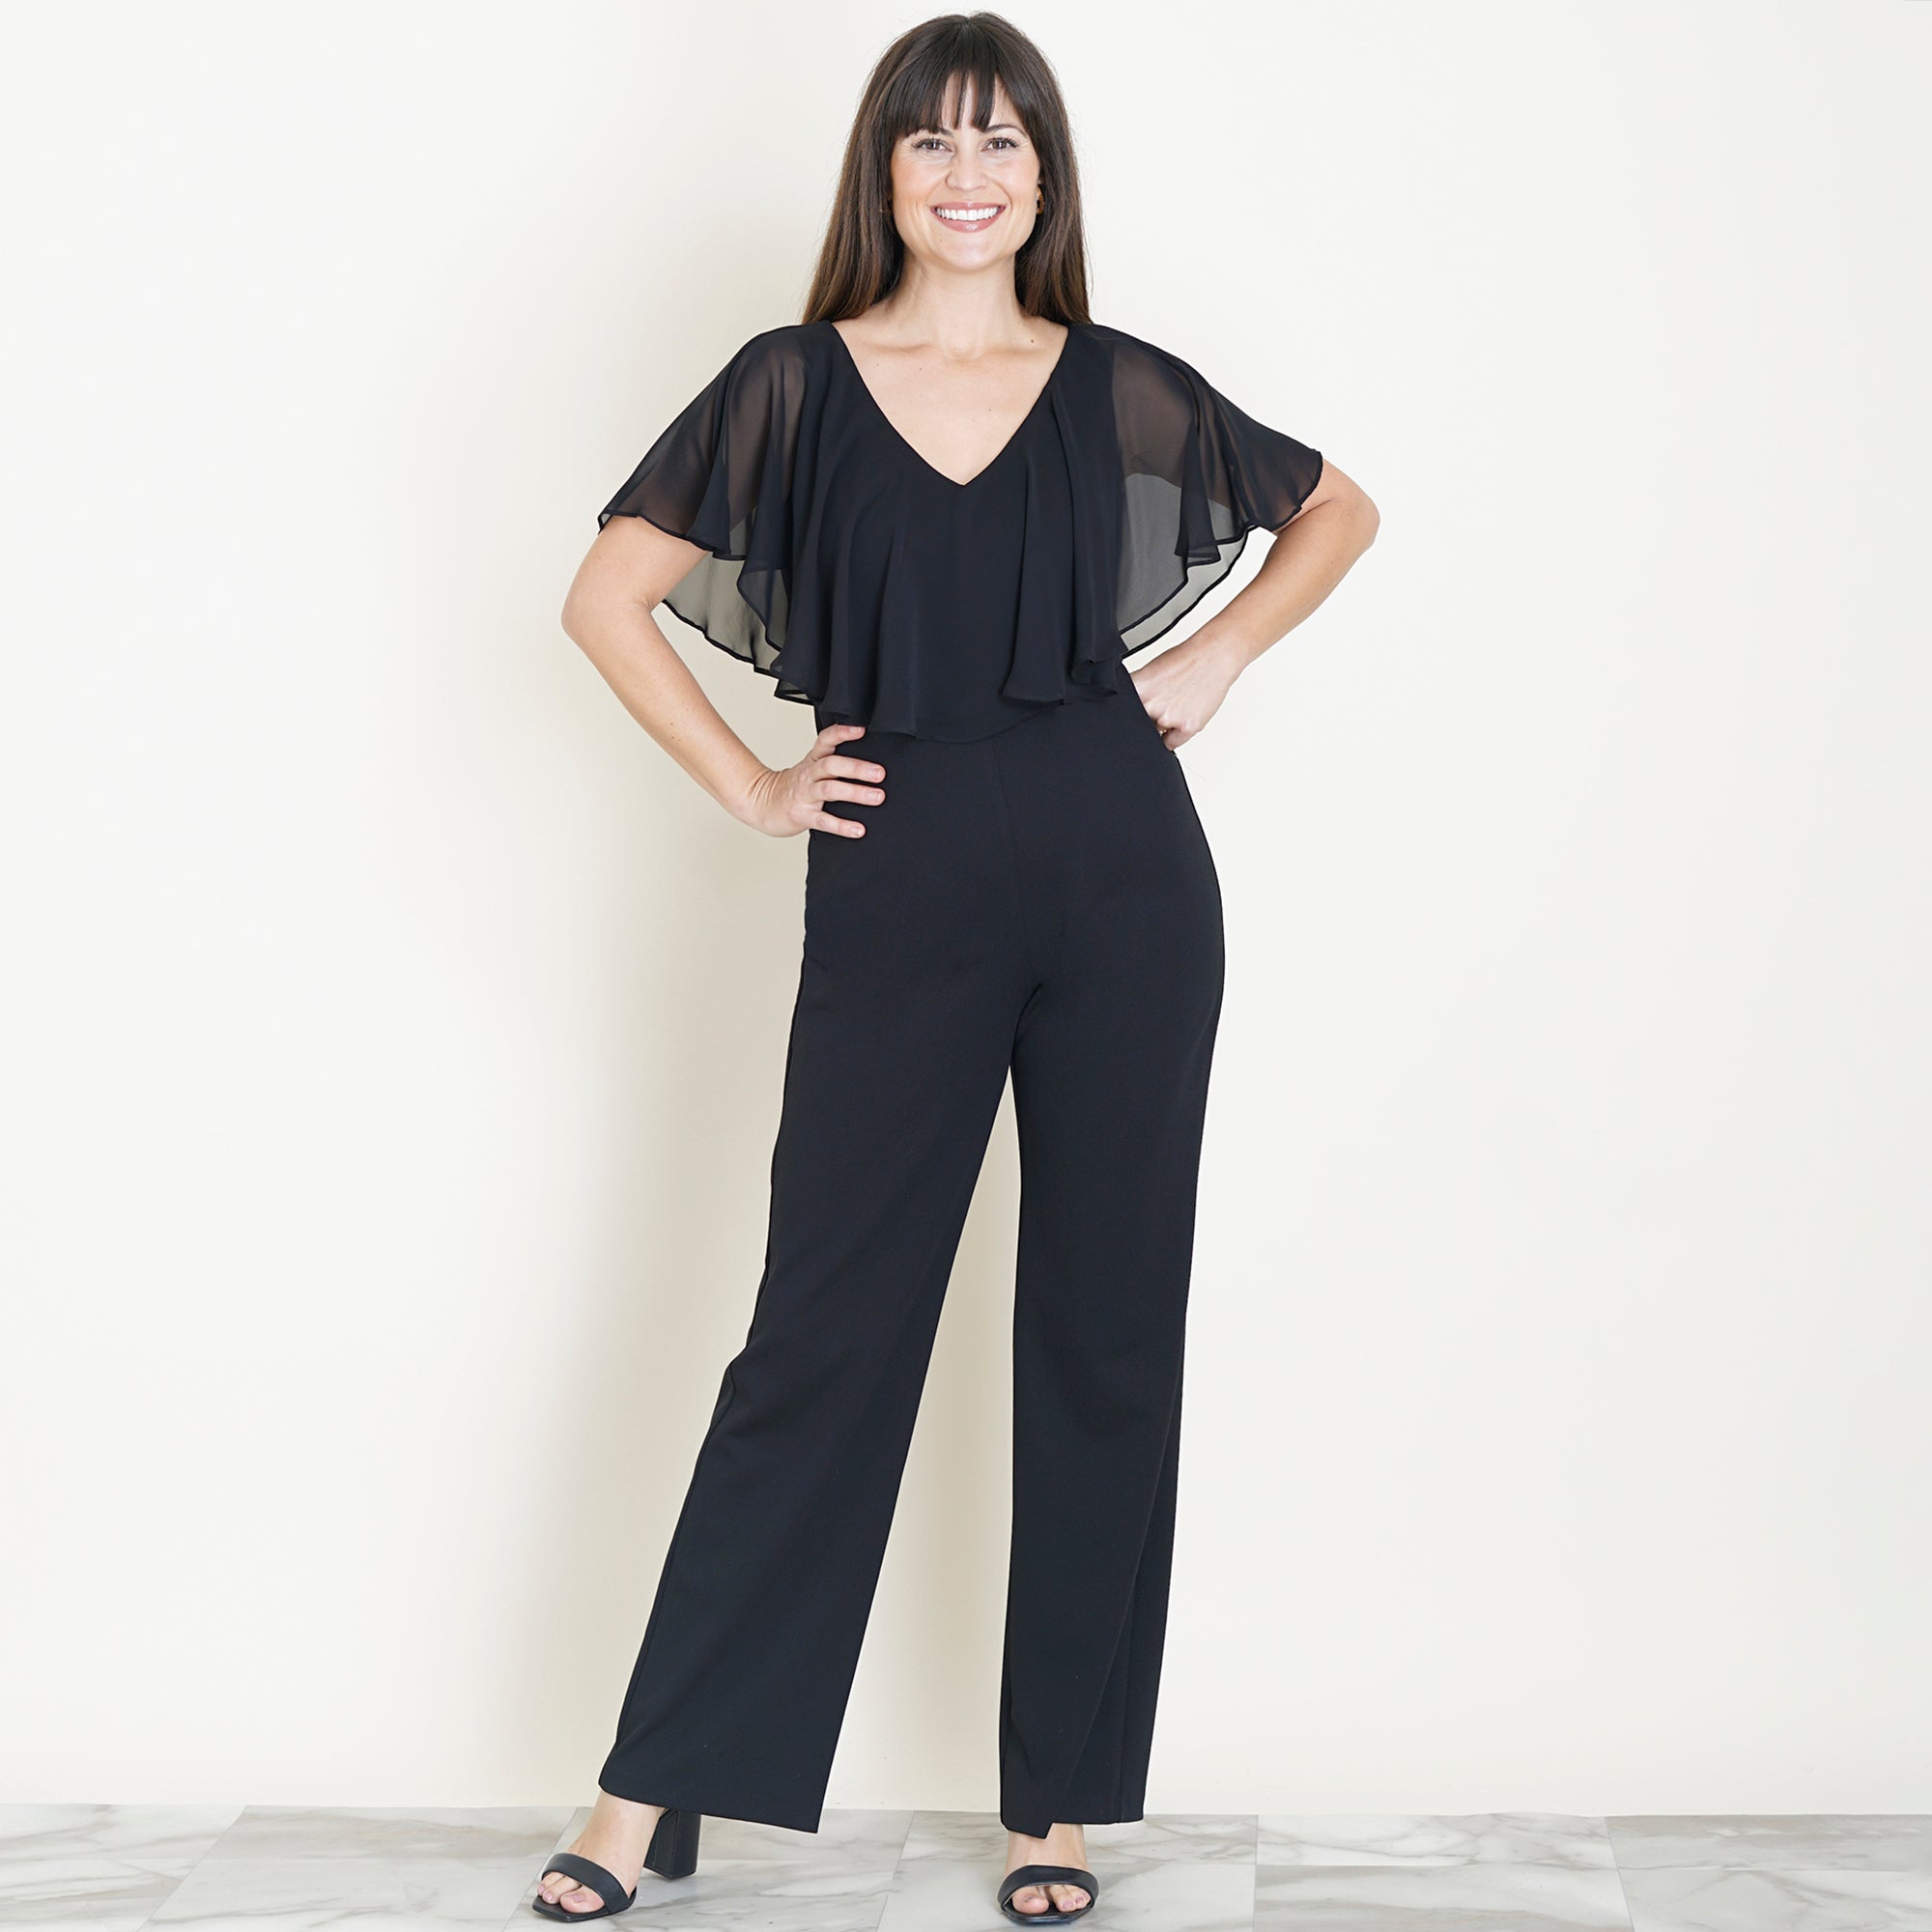 Woman posing wearing Black Sunny 2.0 Jumpsuit from Connected Apparel